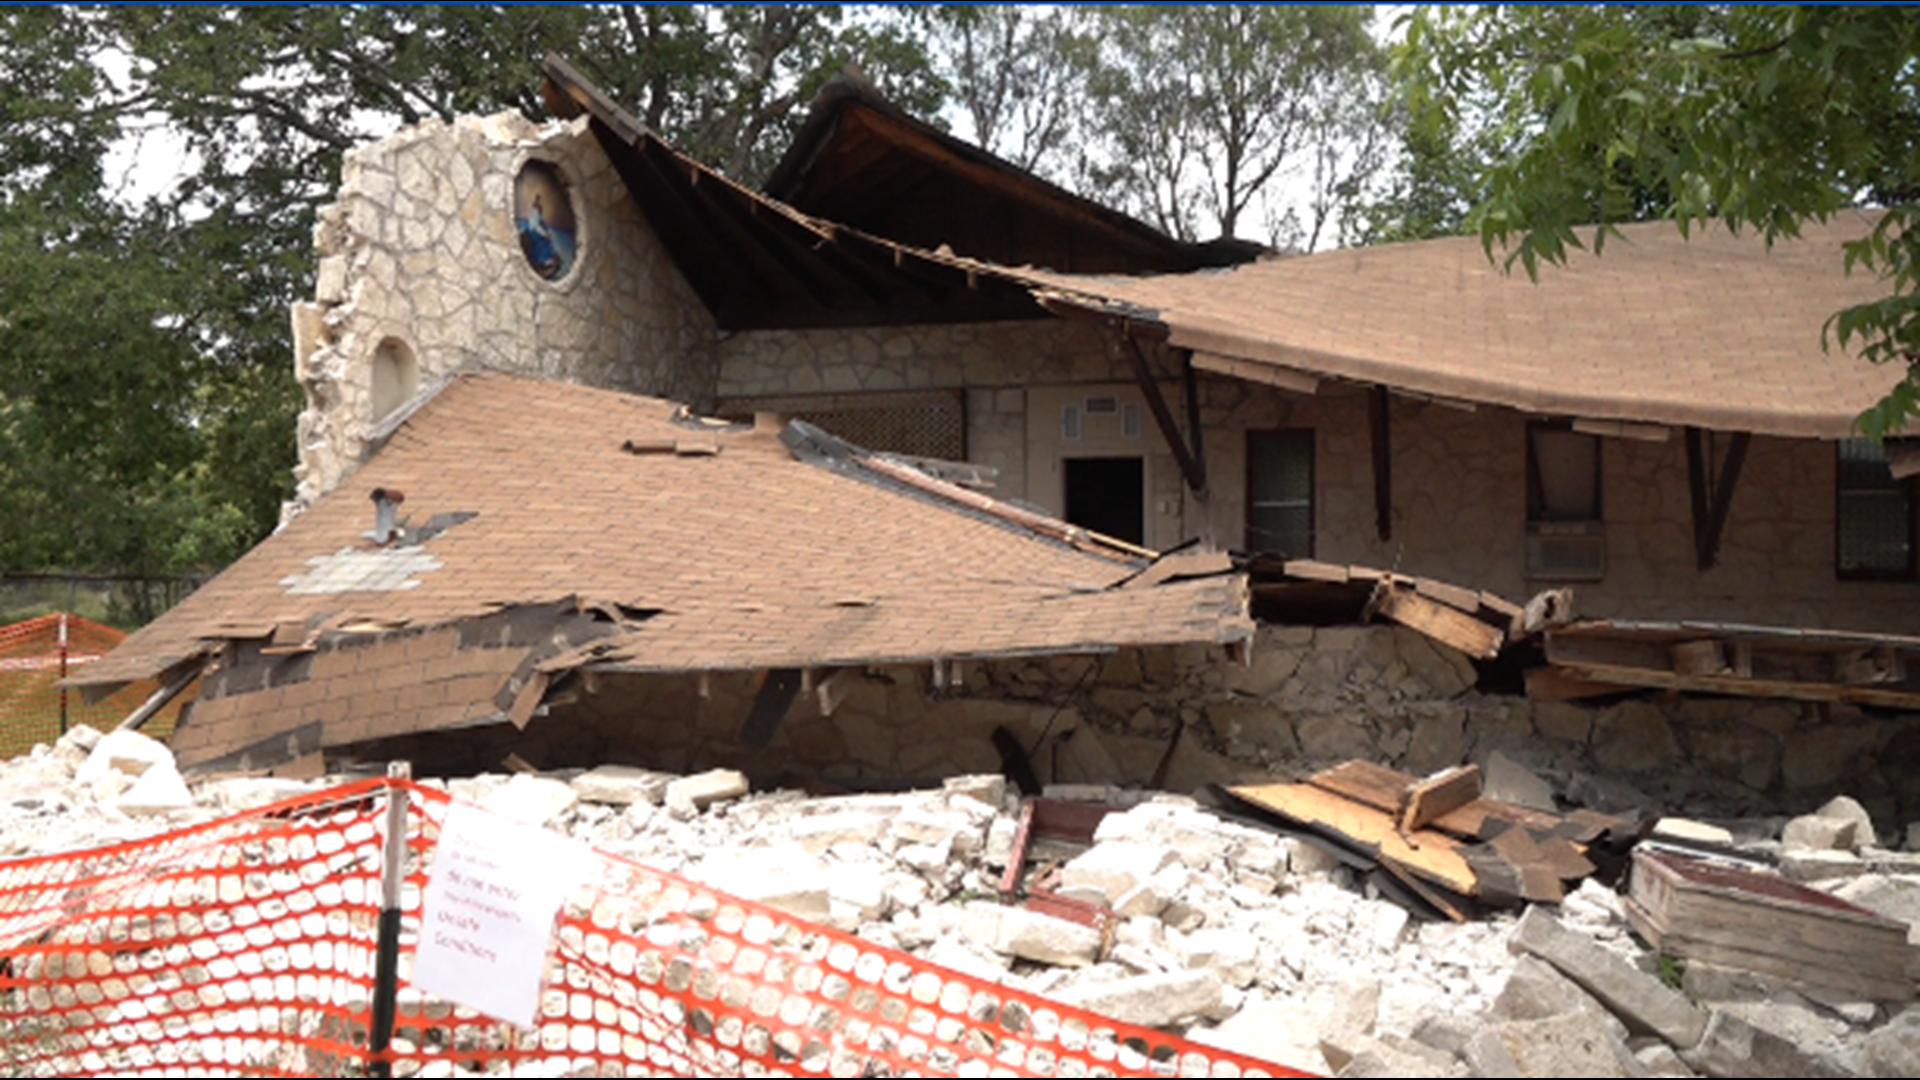 The Lampasas community is working to save a small stone church after a wall caved in several weeks ago.